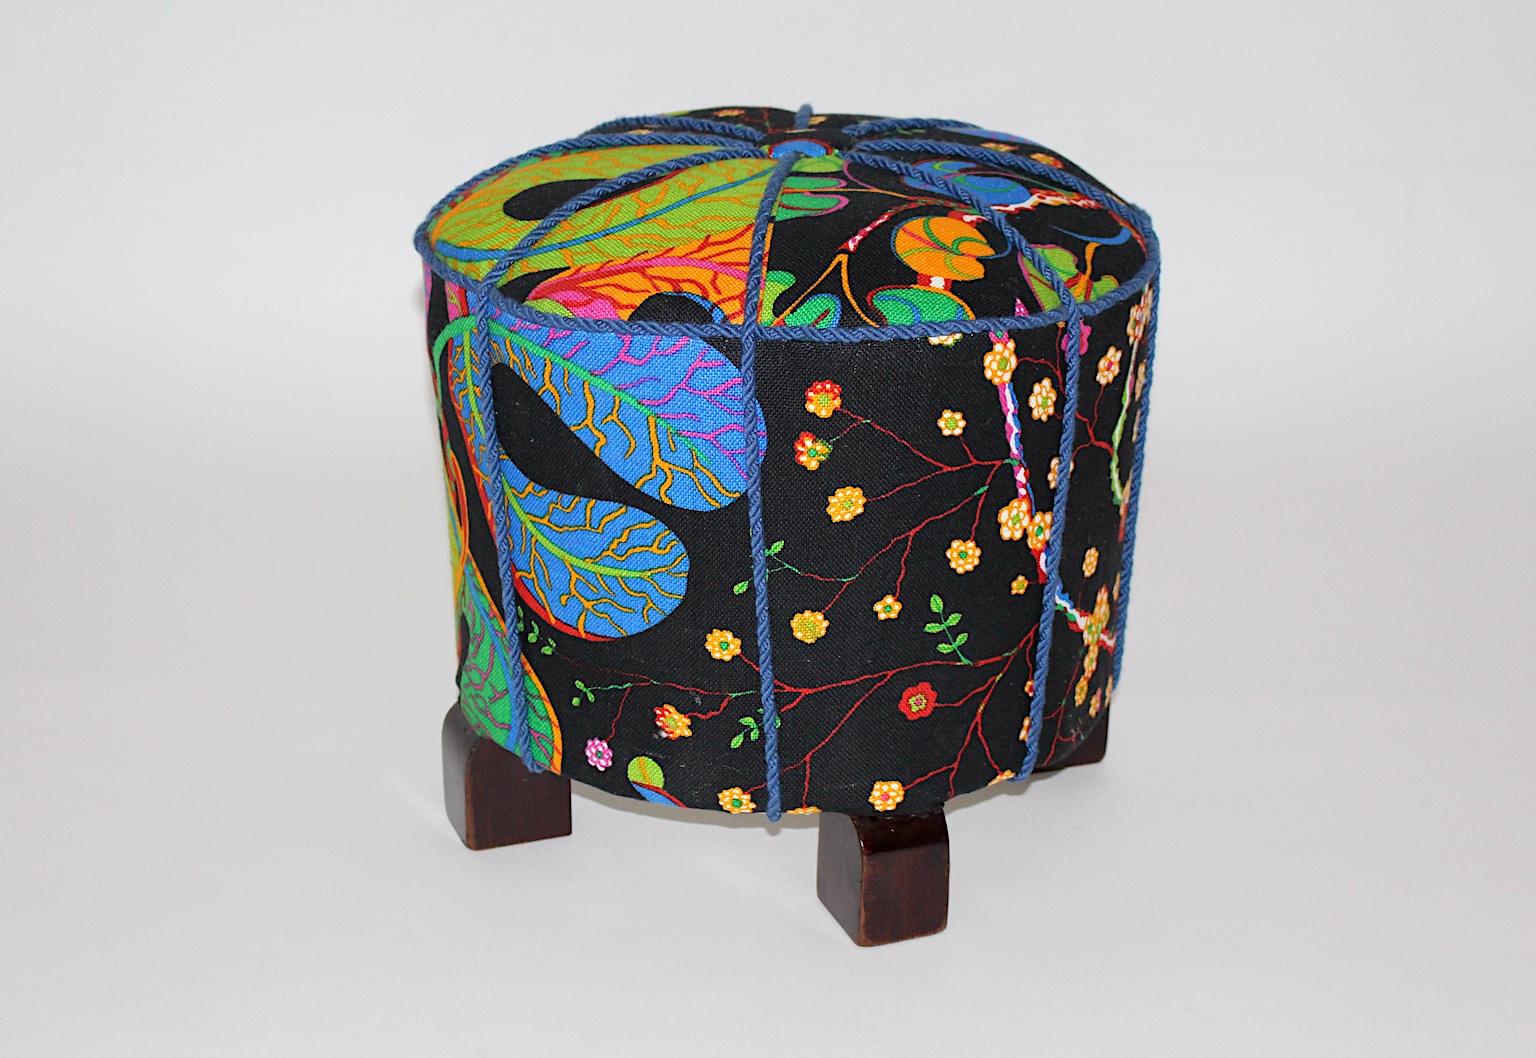 Art Deco Vintage Beech Pouf or Stool with Josef Frank Fabric, 1930s, Austria For Sale 8